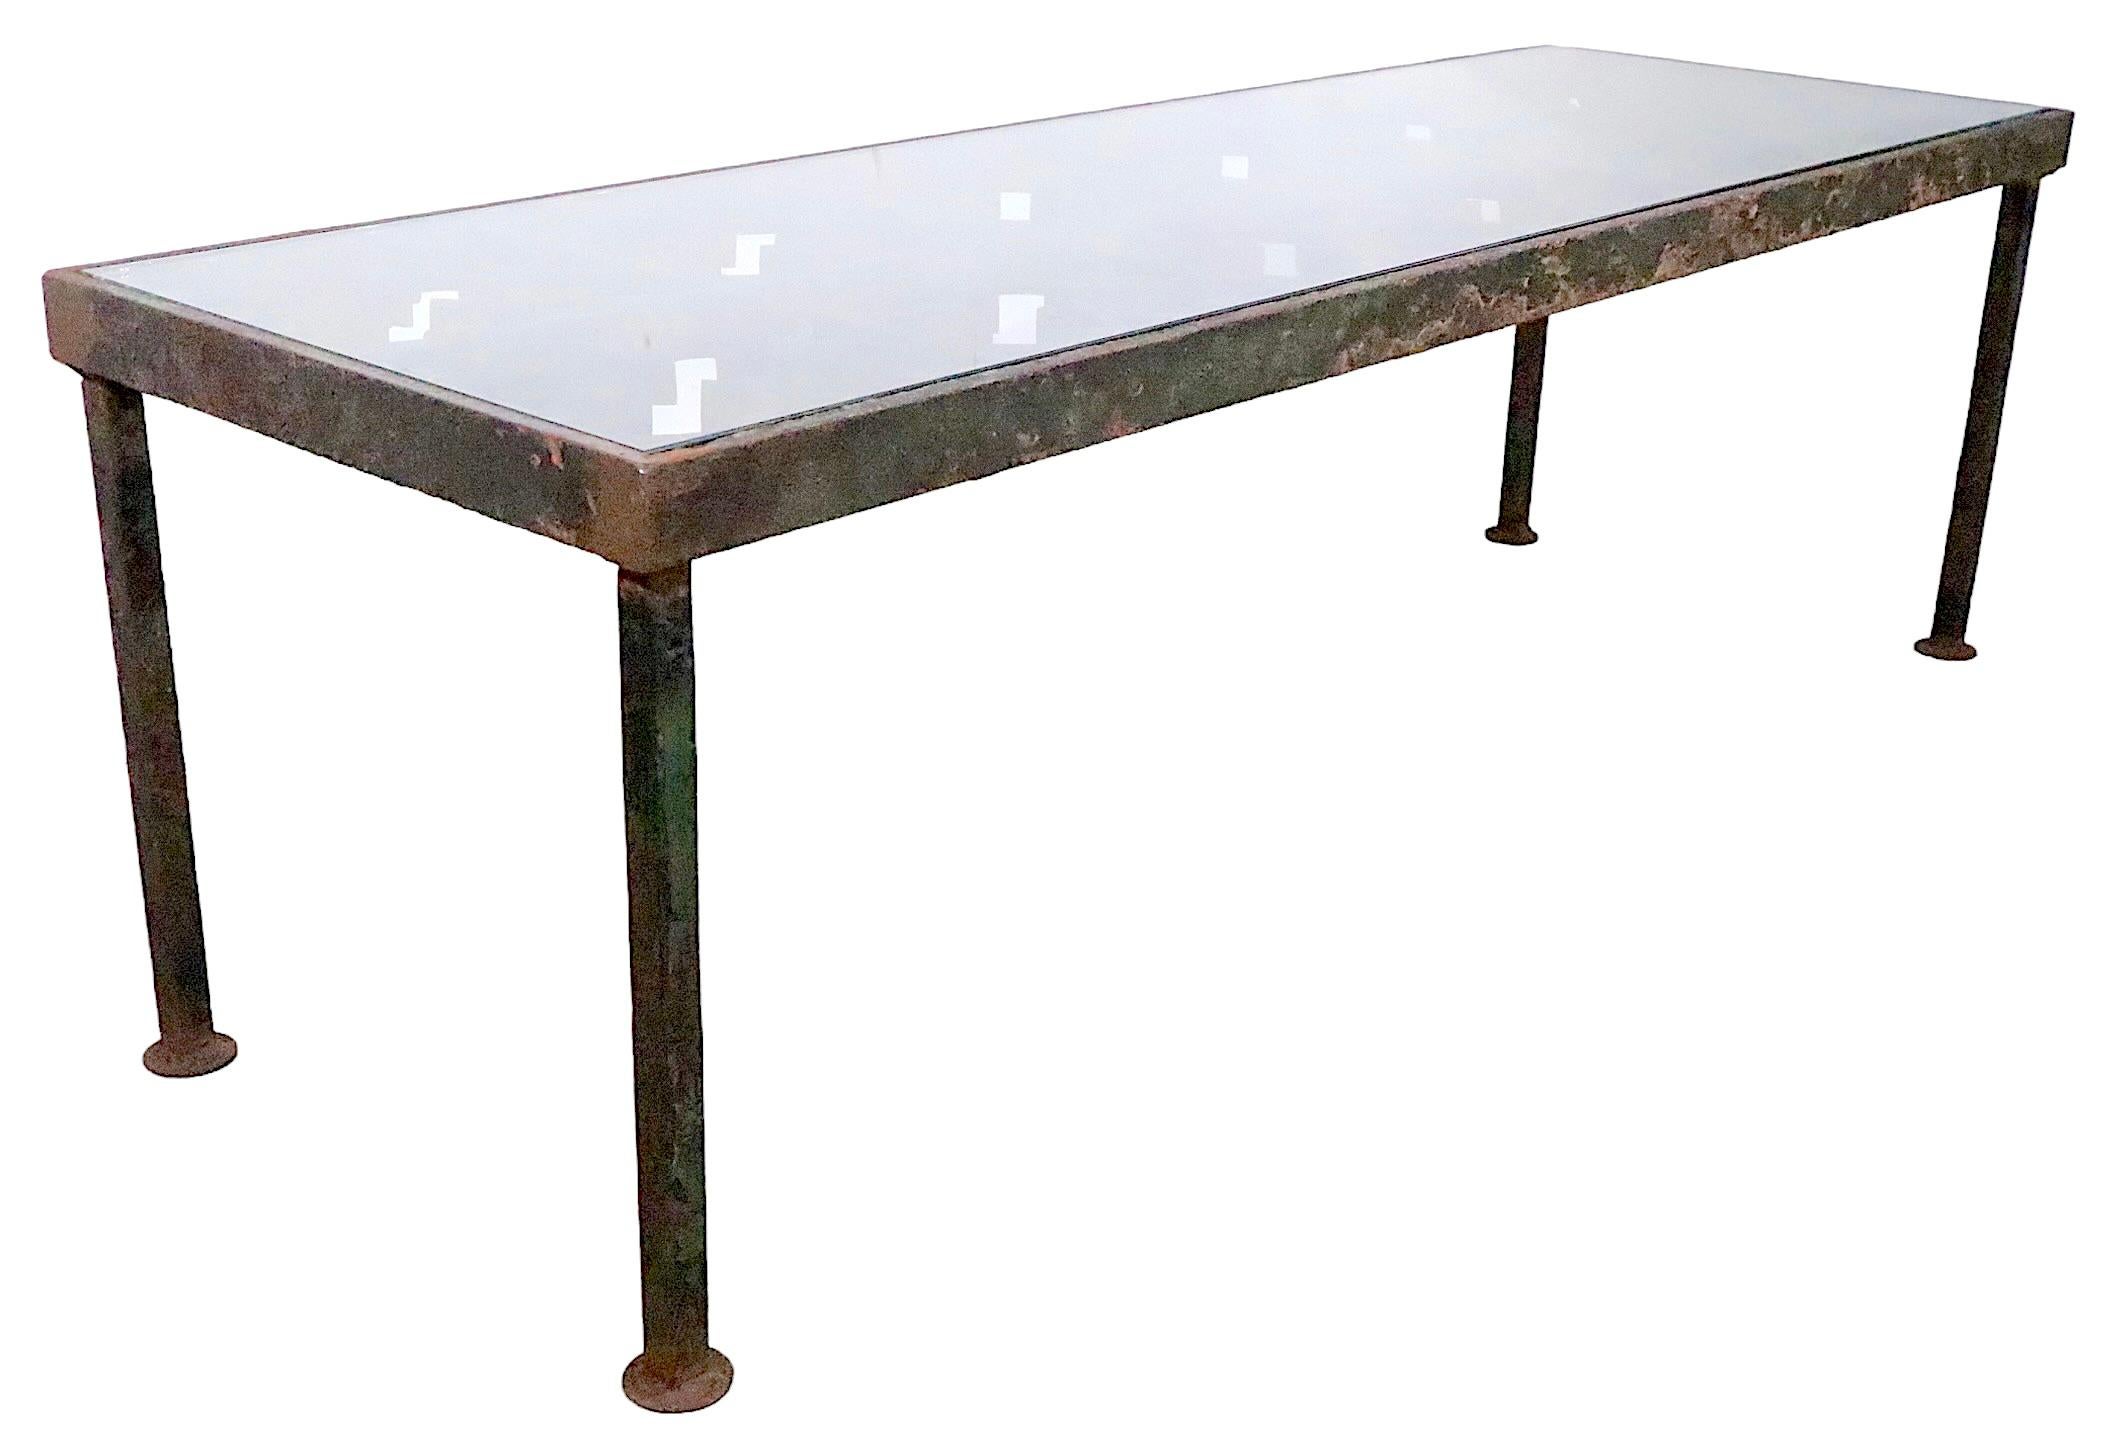 Well crafted garden, patio, indoor/outdoor coffee table composed of steel, cast iron and plate glass. The table top is a section of  ( very ) heavy cast iron, salvaged from an old building, in a heavy steel frame and squared steel legs. The top is a